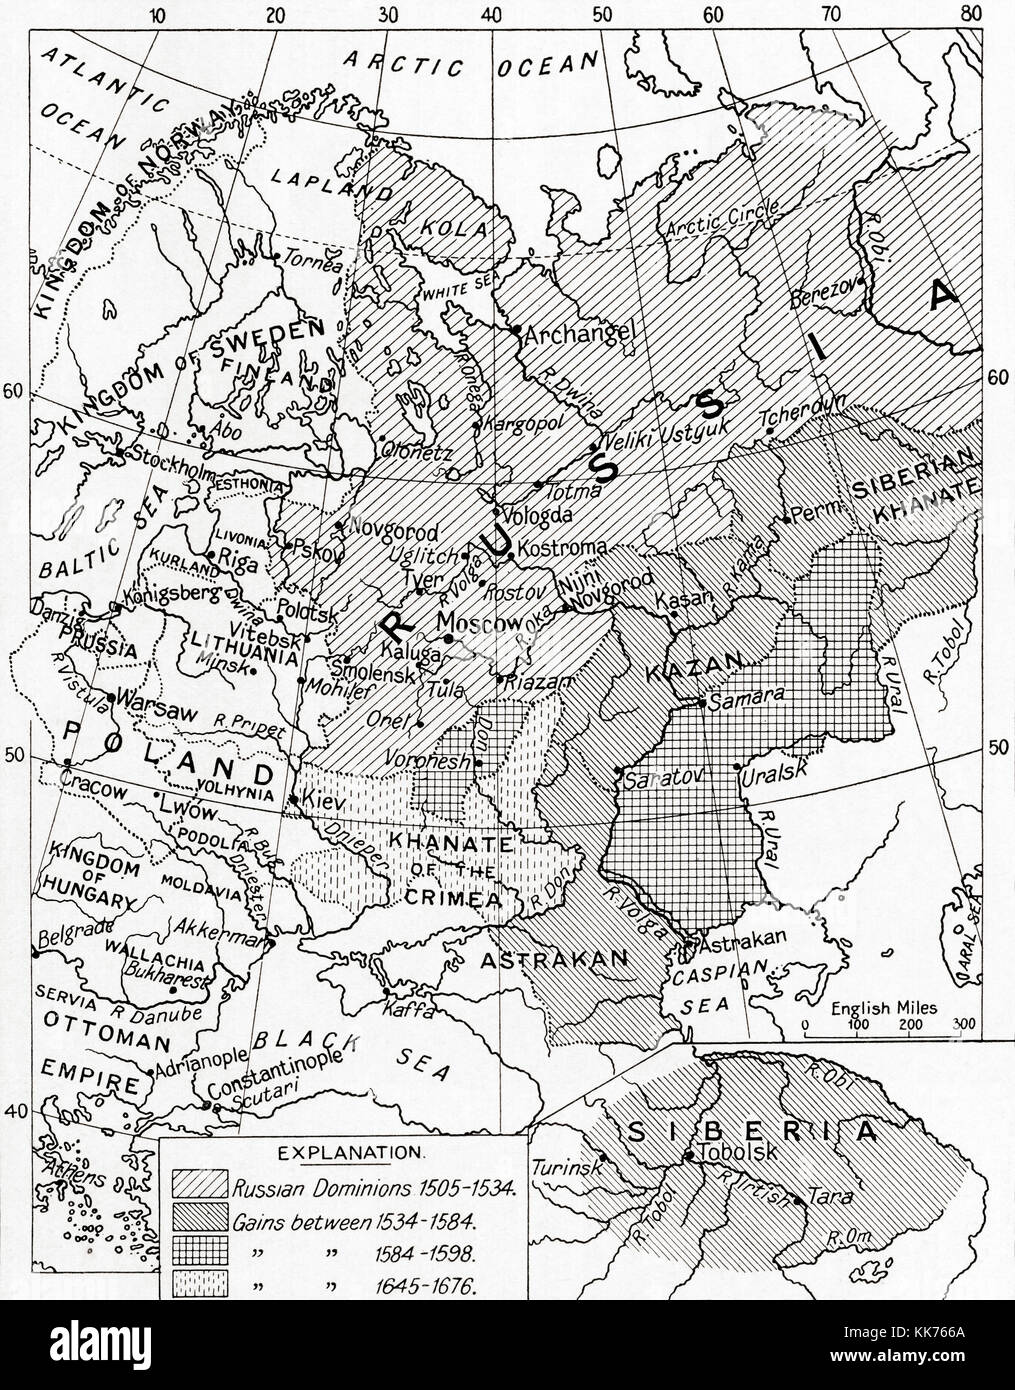 Map of Russia in the 16th and 17th centuries.  From Hutchinson's History of the Nations, published 1915. Stock Photo